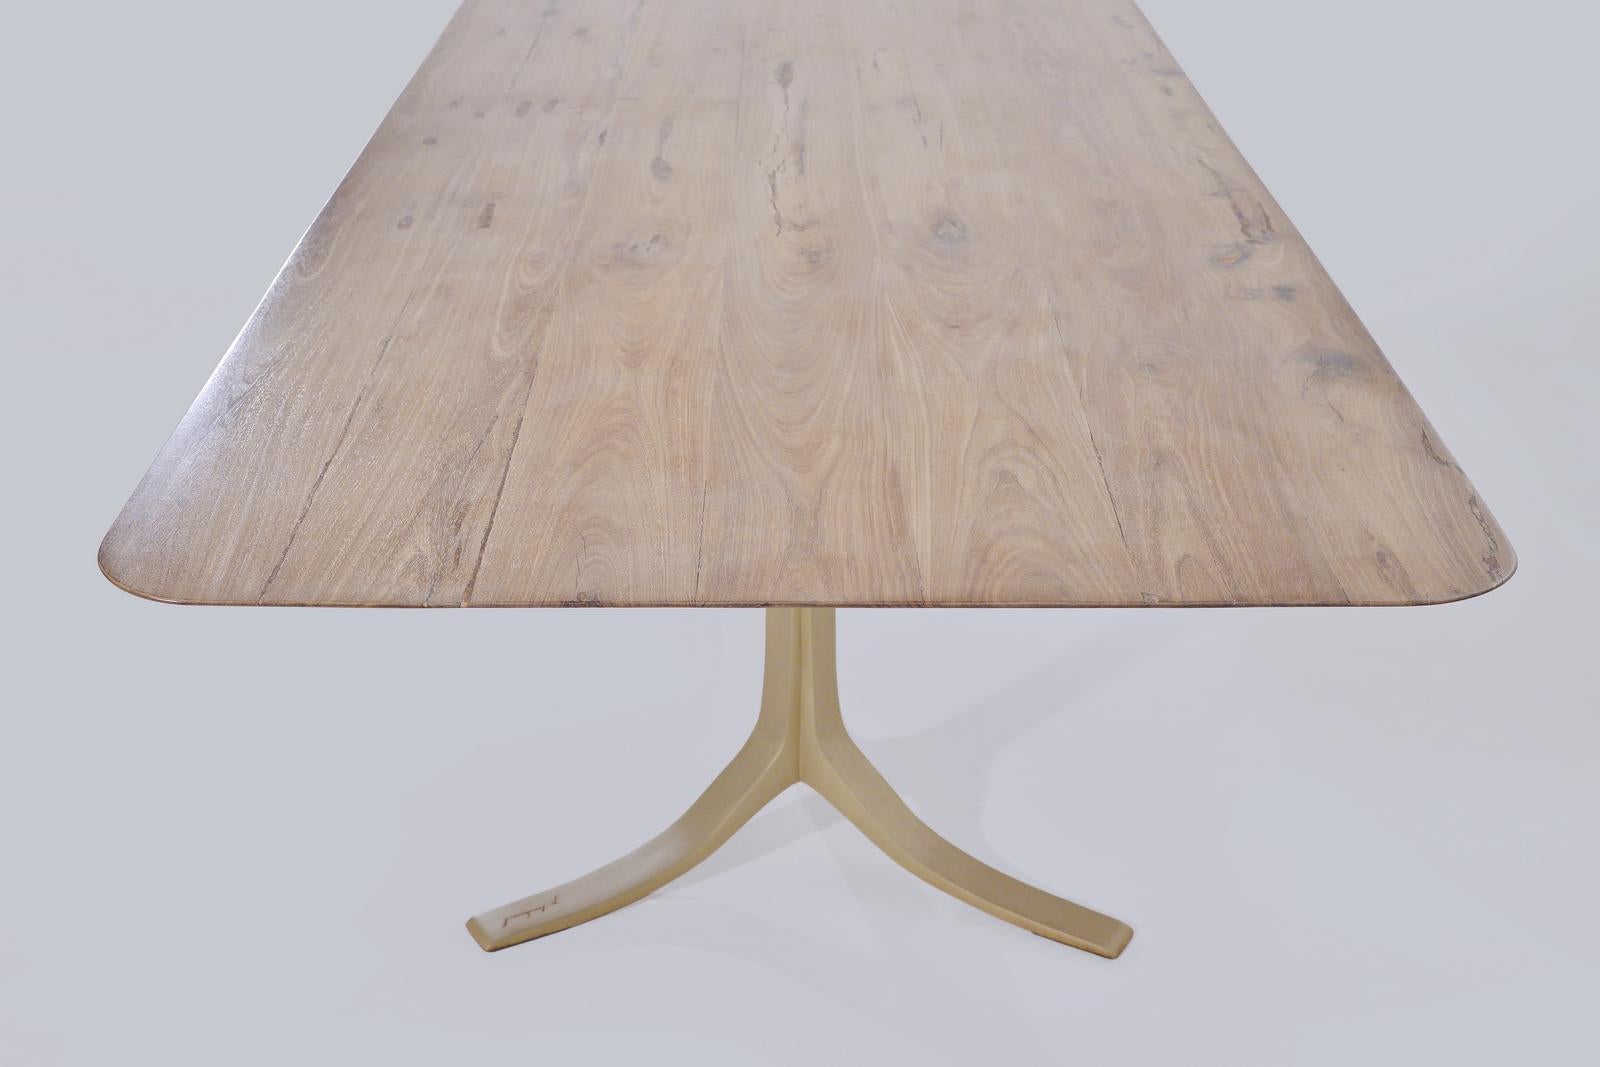 Minimalist Bespoke Chef Table, Reclaimed Wood, Sand Cast Brass Base, by P. Tendercool For Sale